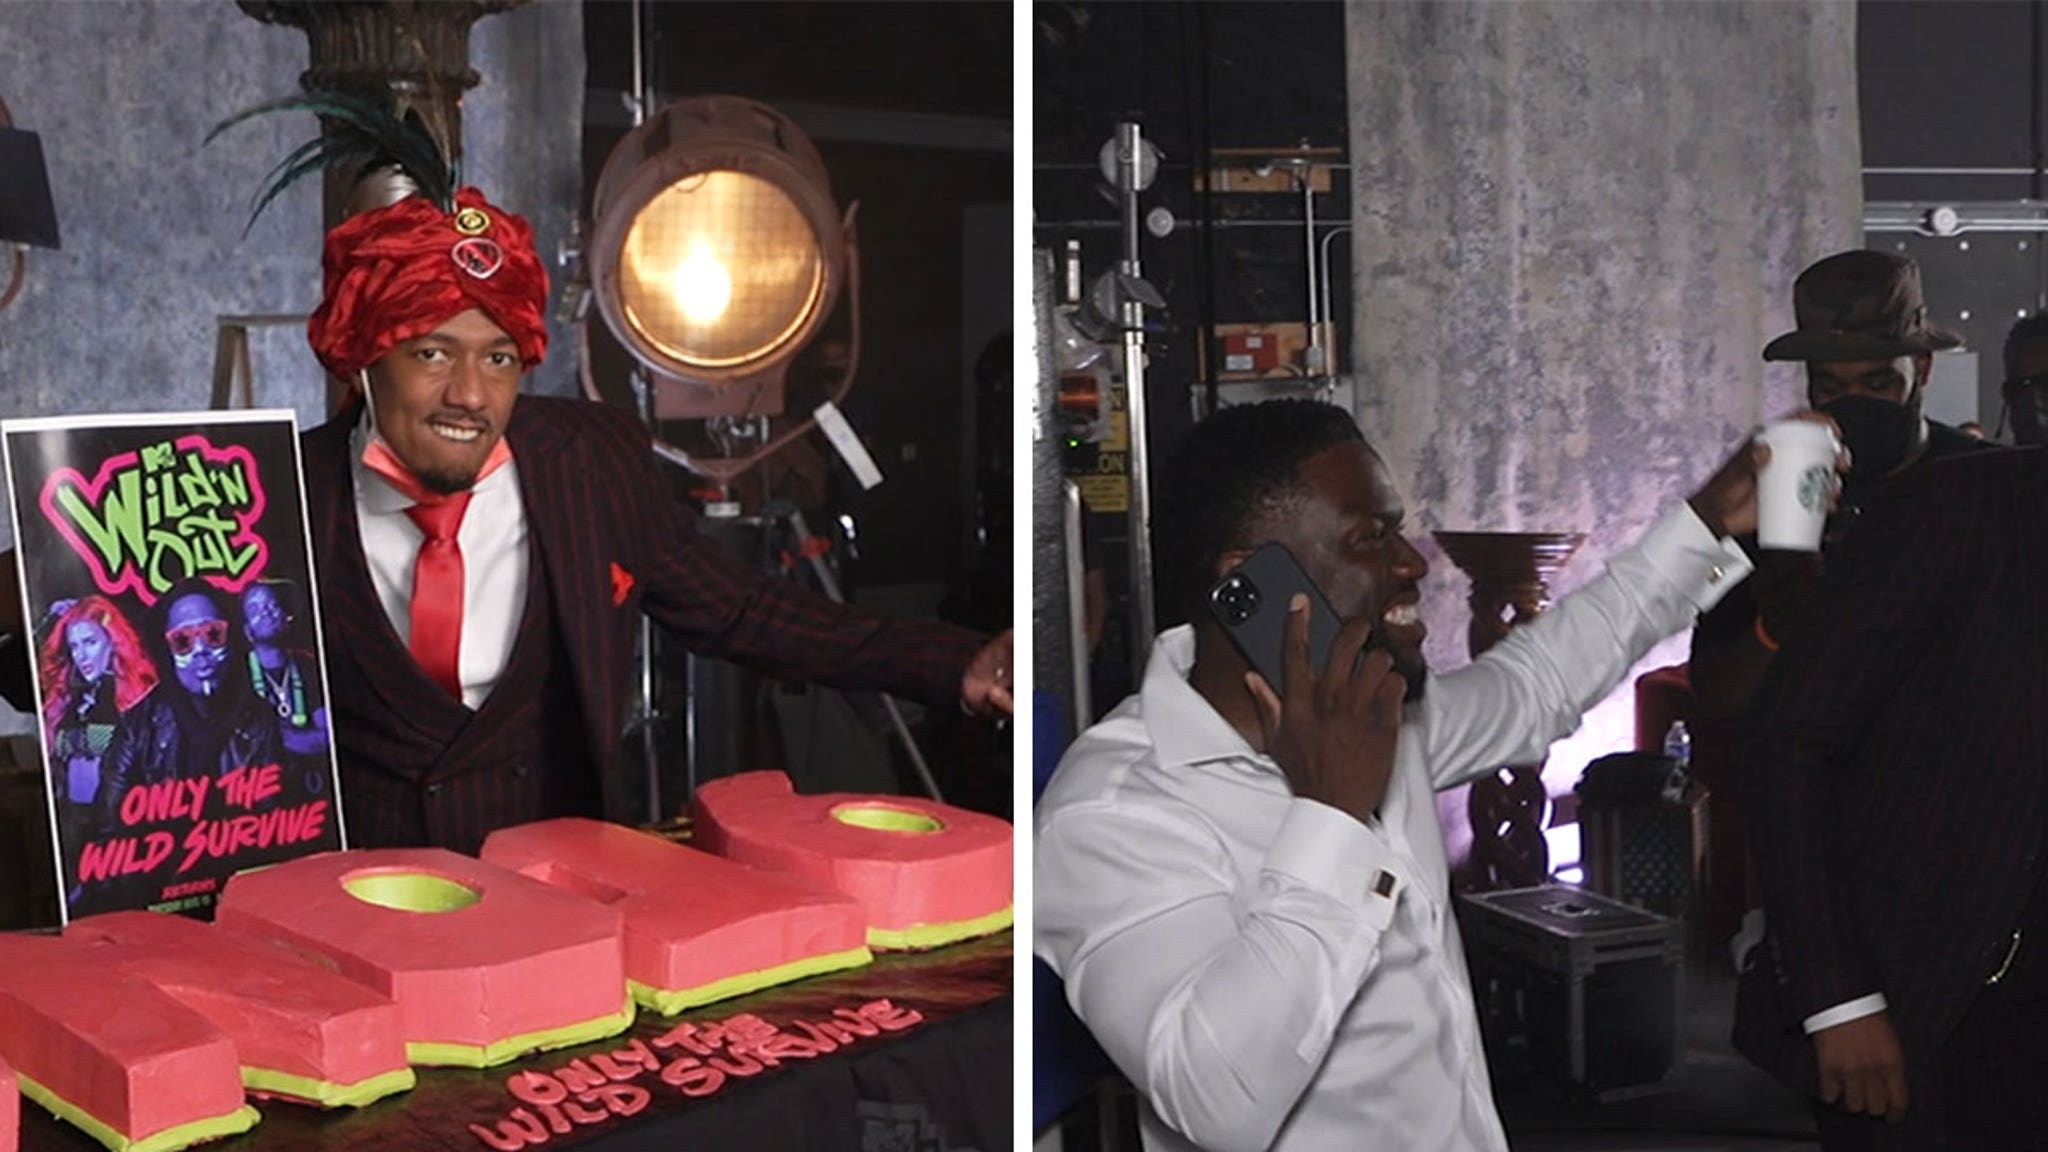 Nick Cannon was amazed at the "Wild" N out-return season 16 cake